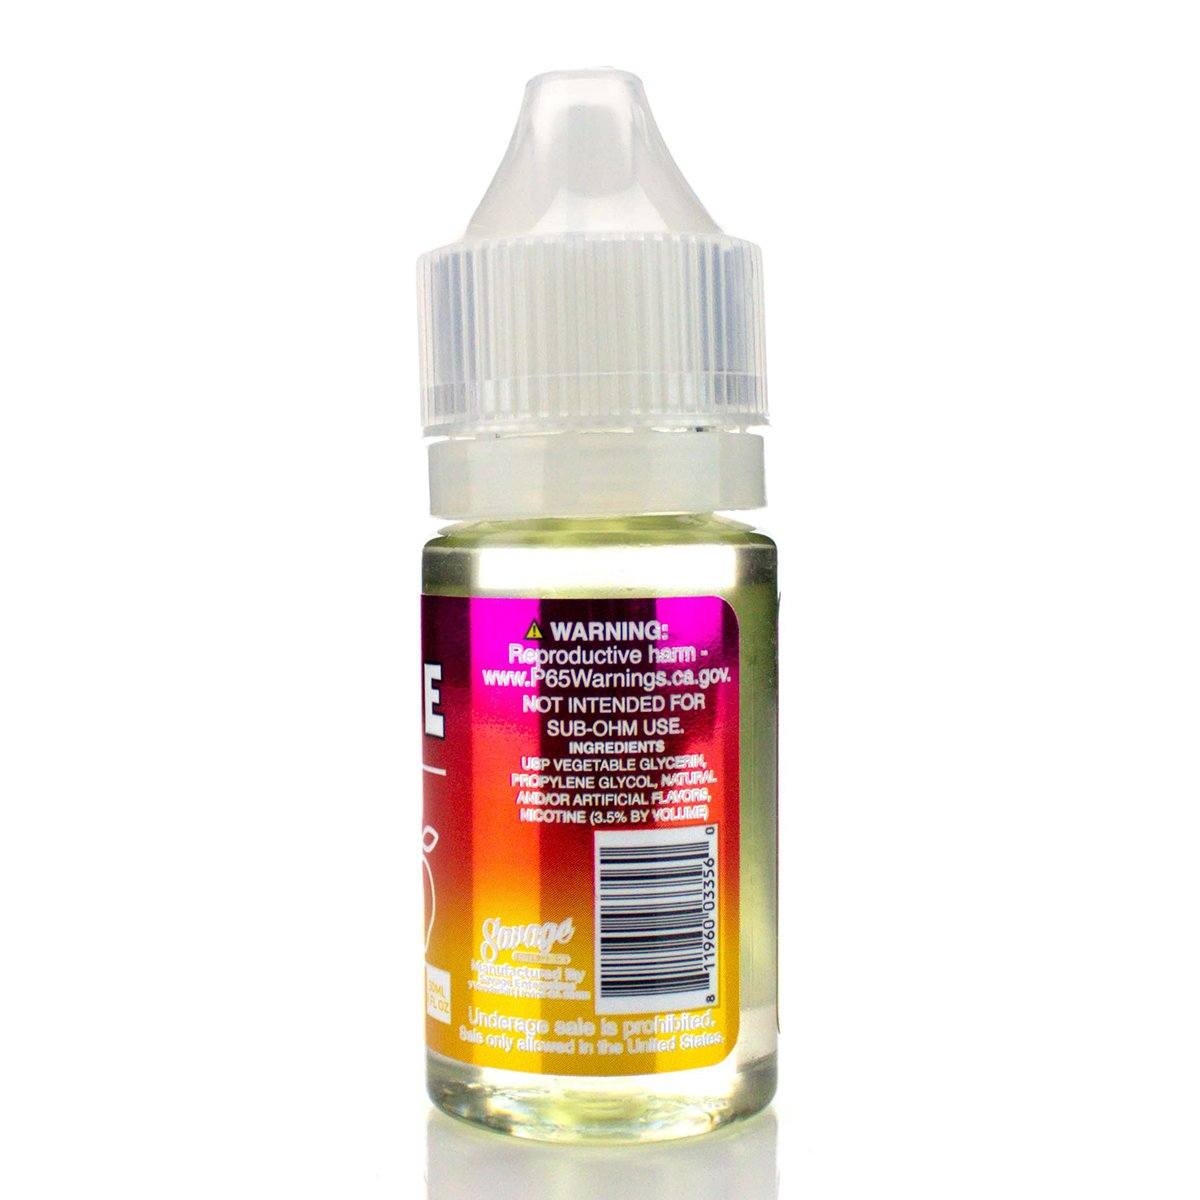 Peachy Mango Pineapple by Ripe Collection Salts 30ml Best Sales Price - eJuice